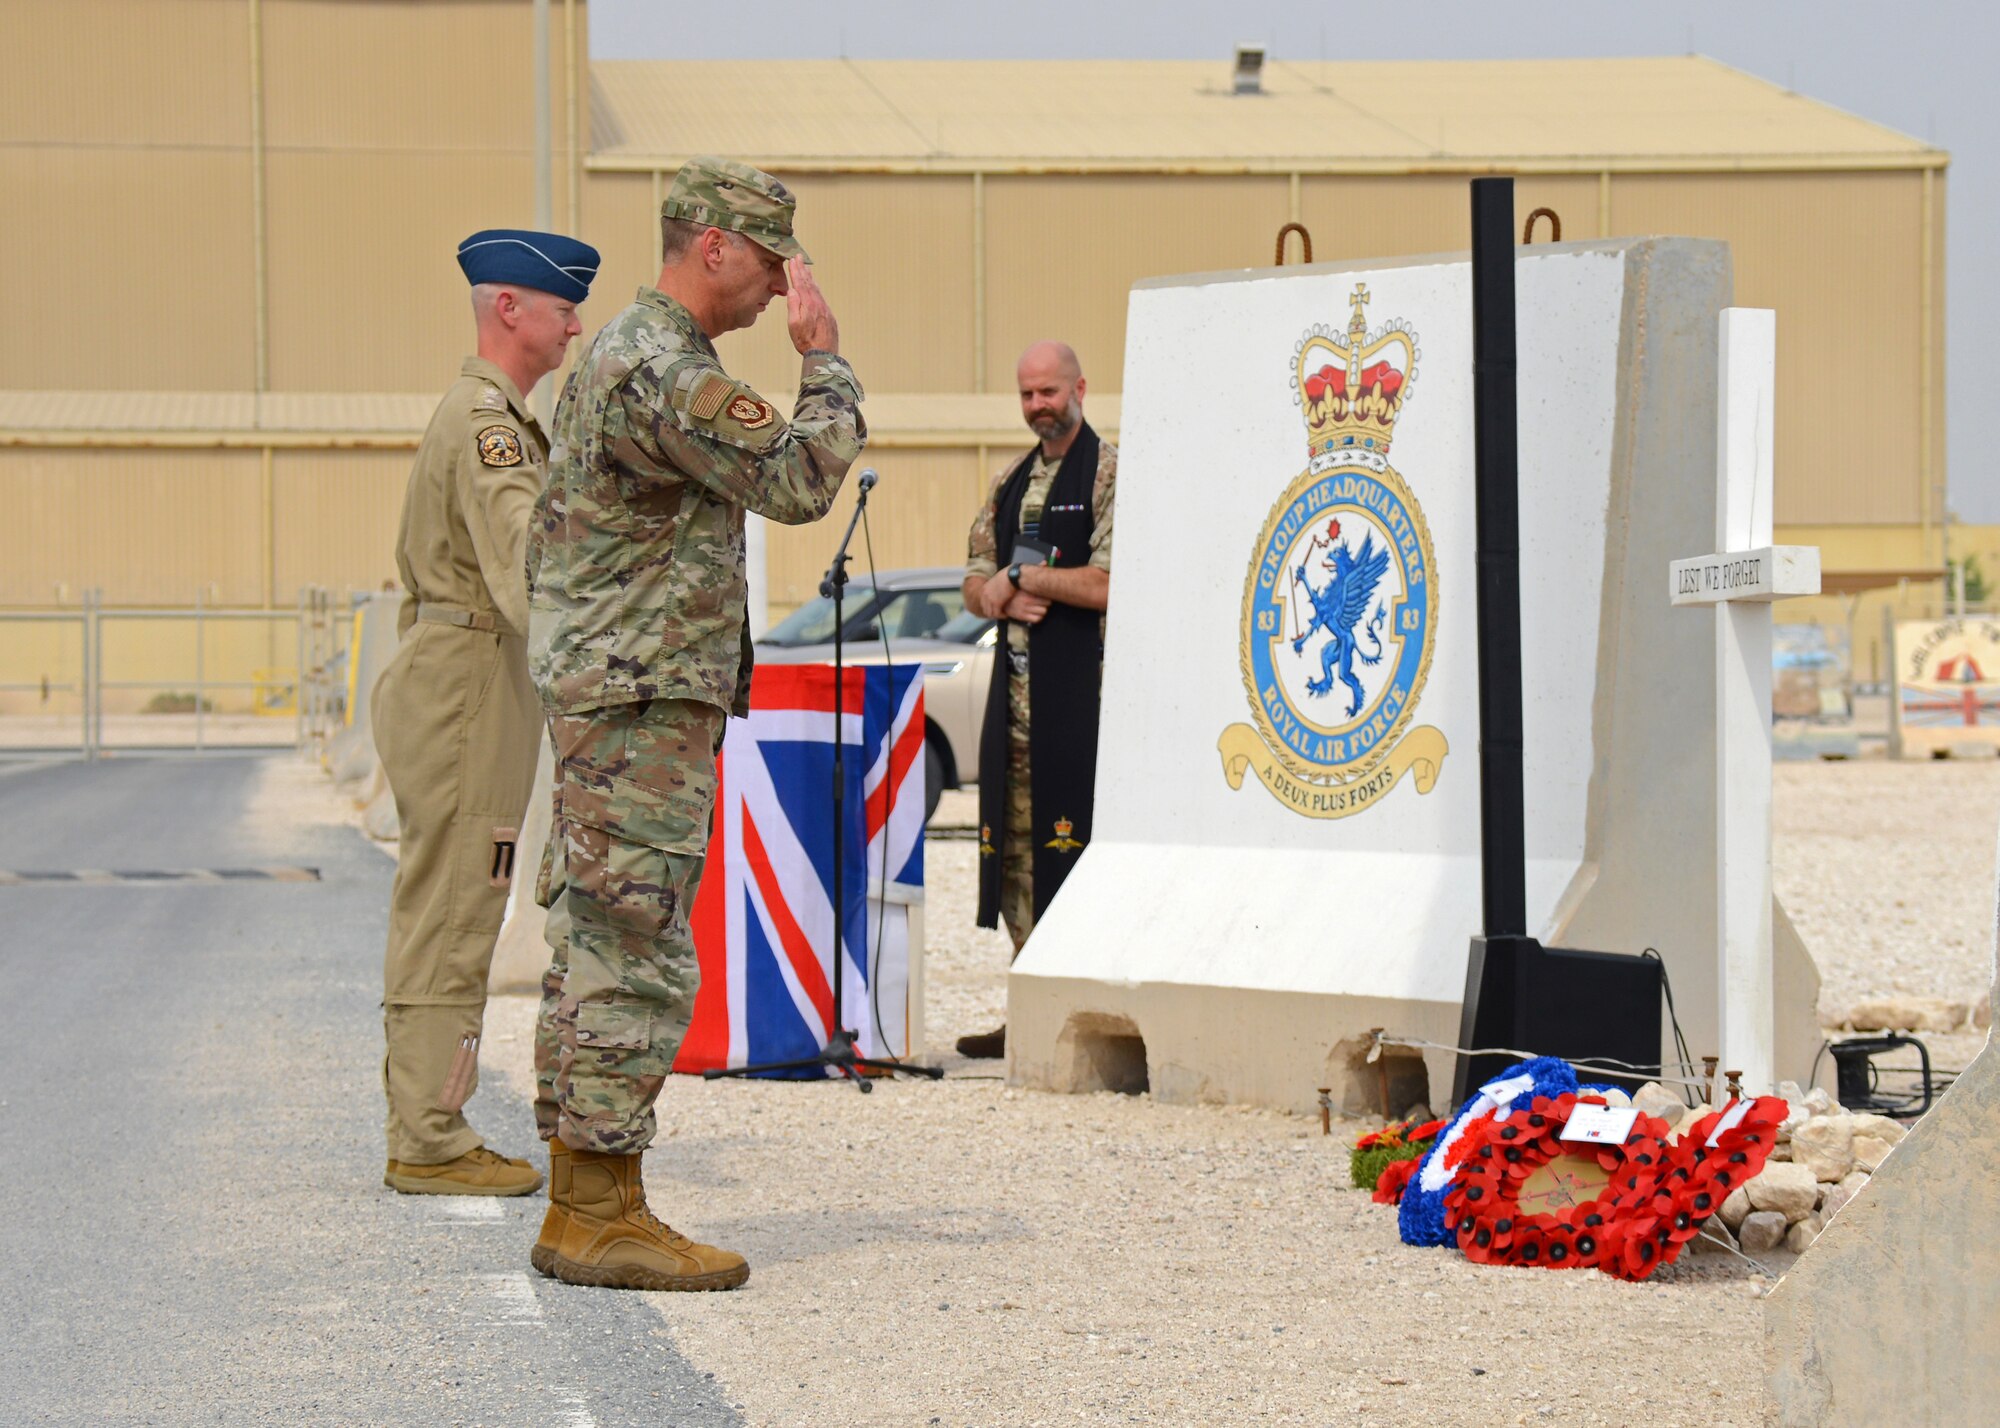 Brig. Gen. David Mineau, Ninth Air Force Deputy commander, salutes poppy wreaths at a Remembrance Day ceremony.